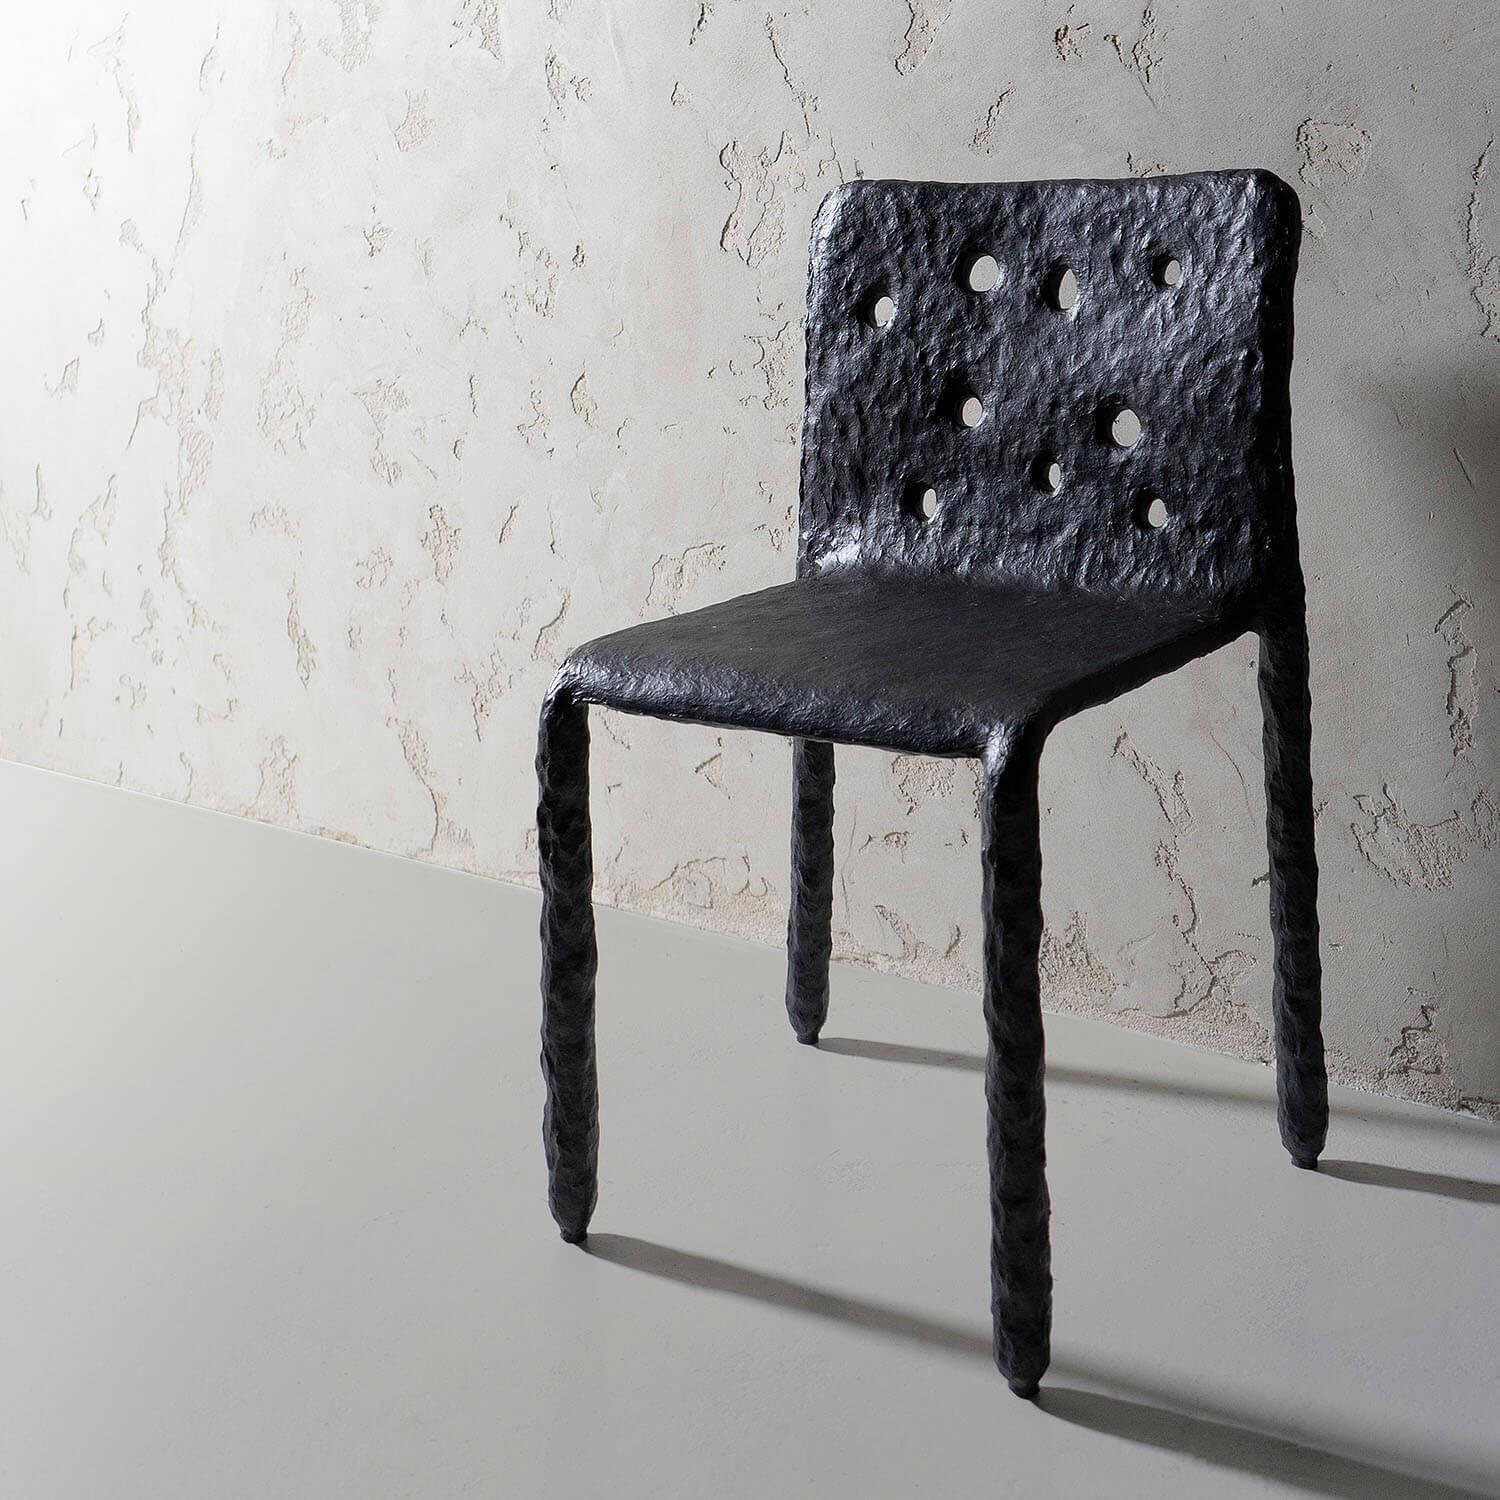 Sculpted Indoor Contemporary Chair by FAINA
Design: Victoriya Yakusha
Material: steel, flax rubber, biopolymer, cellulose
Dimensions: Height: 82 x width 48 x legs depth 45 cm
 Weight: 12 kilos.
(Also available in longer version 240 cm